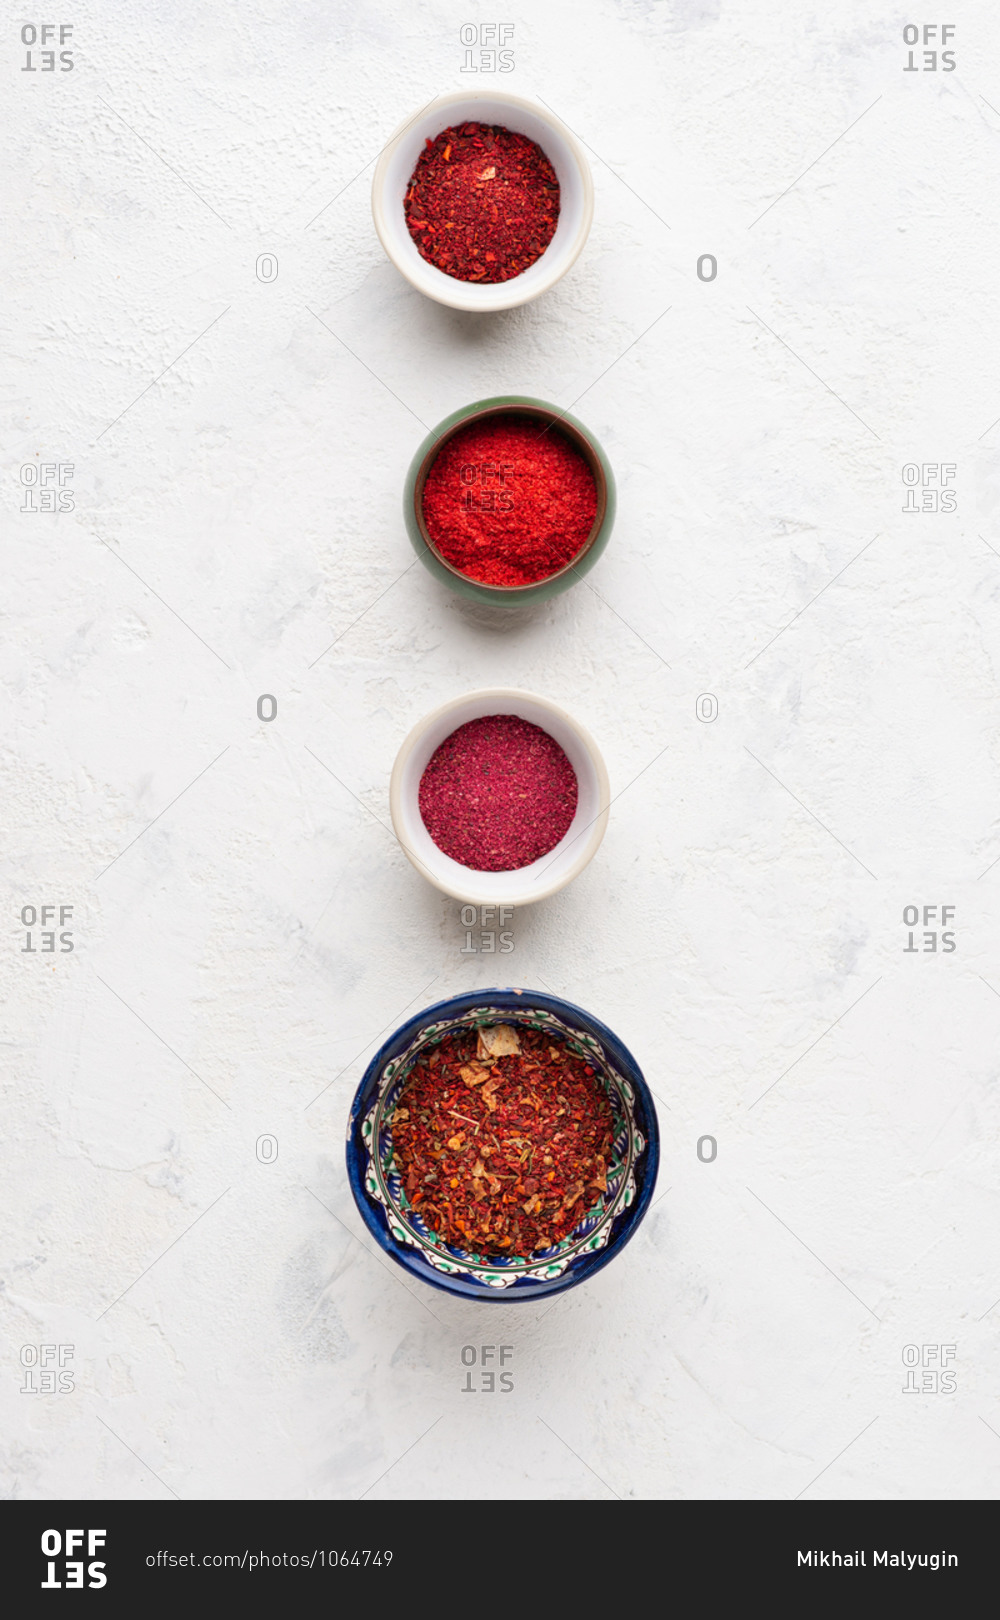 Overhead view of assorted red spices and ingredients over white background